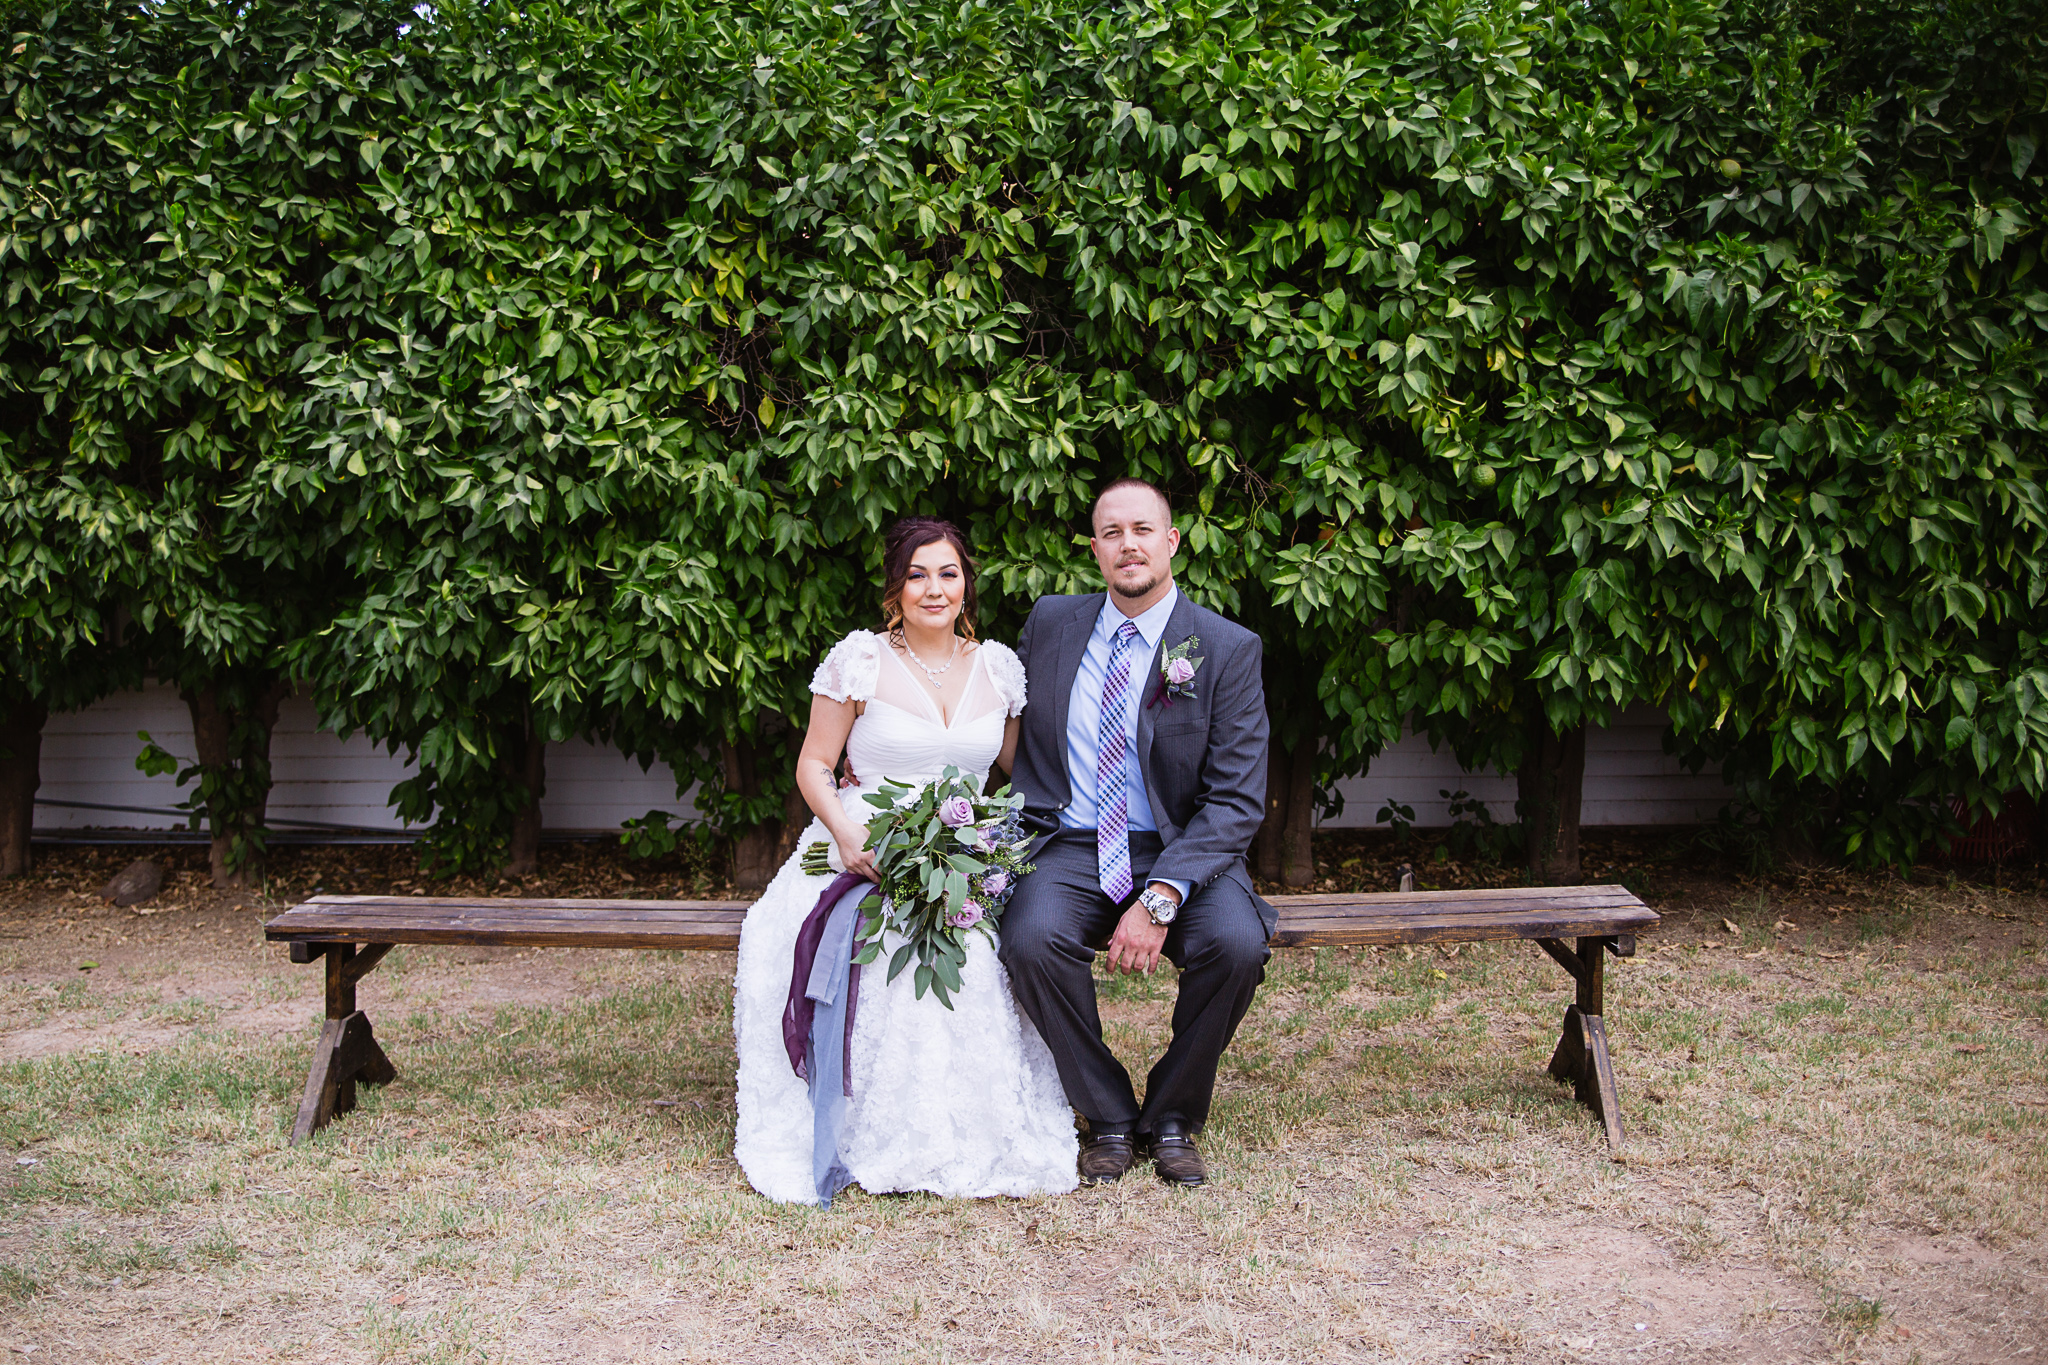 Bride and groom sitting on a bench in front of citrus trees by Arizona wedding photographers PMA Photography.